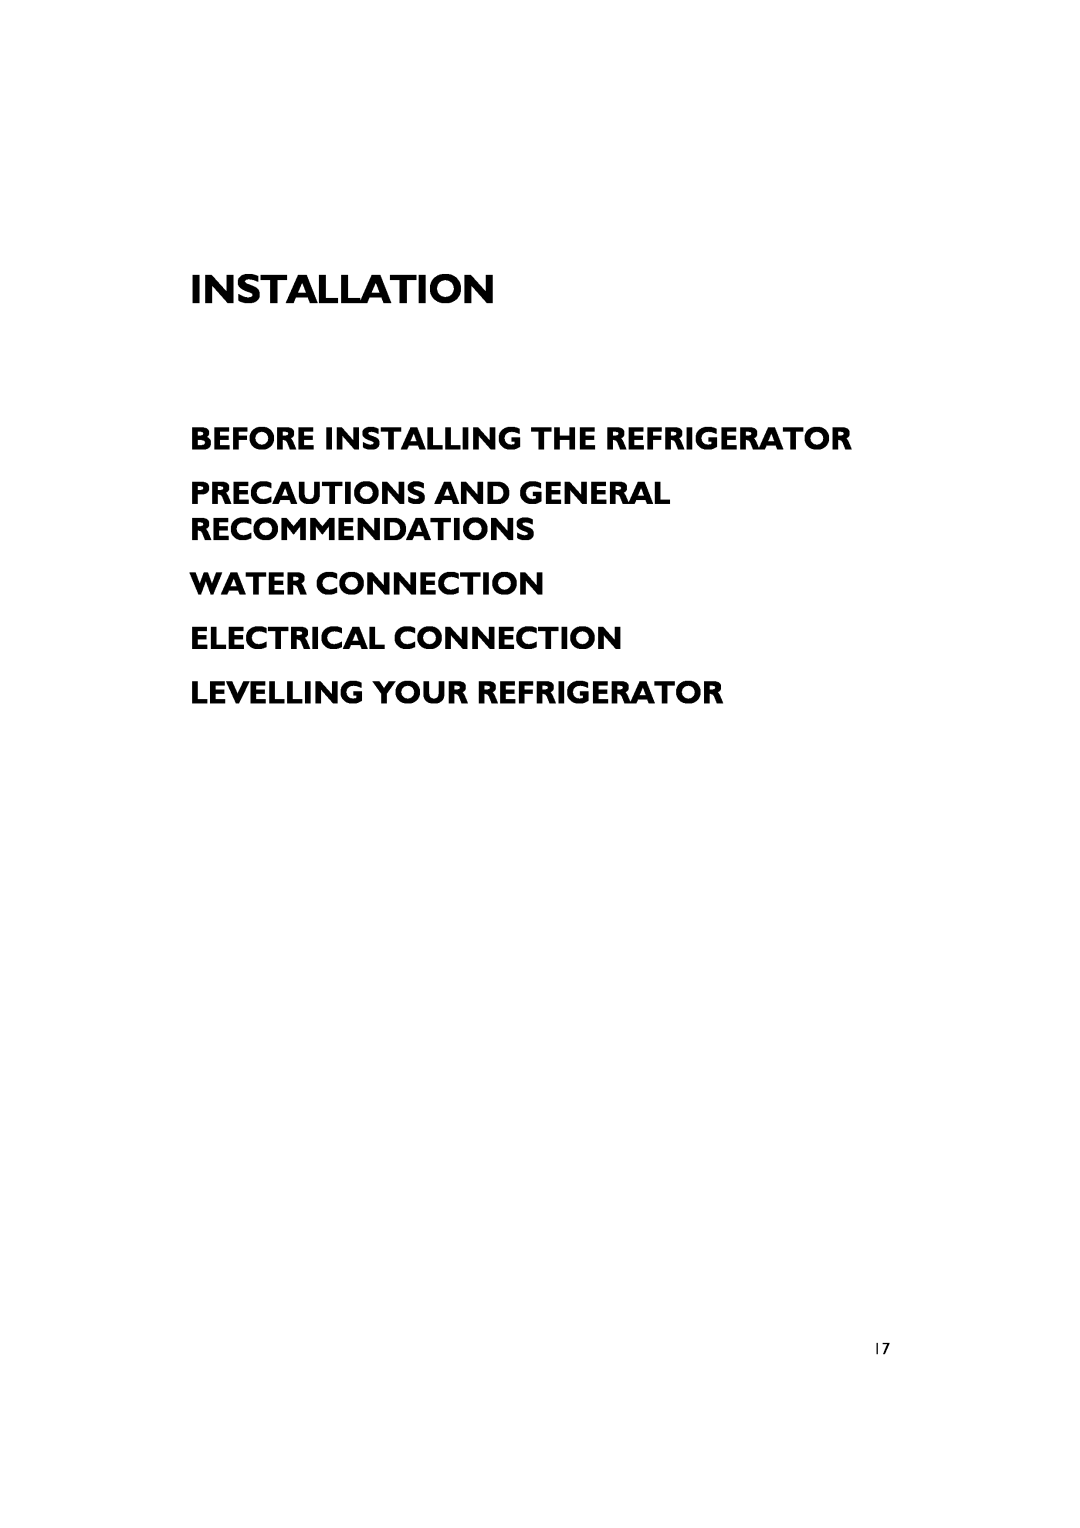 Smeg FA550XBI manual Before Installing The Refrigerator, Precautions And General Recommendations, Installation 